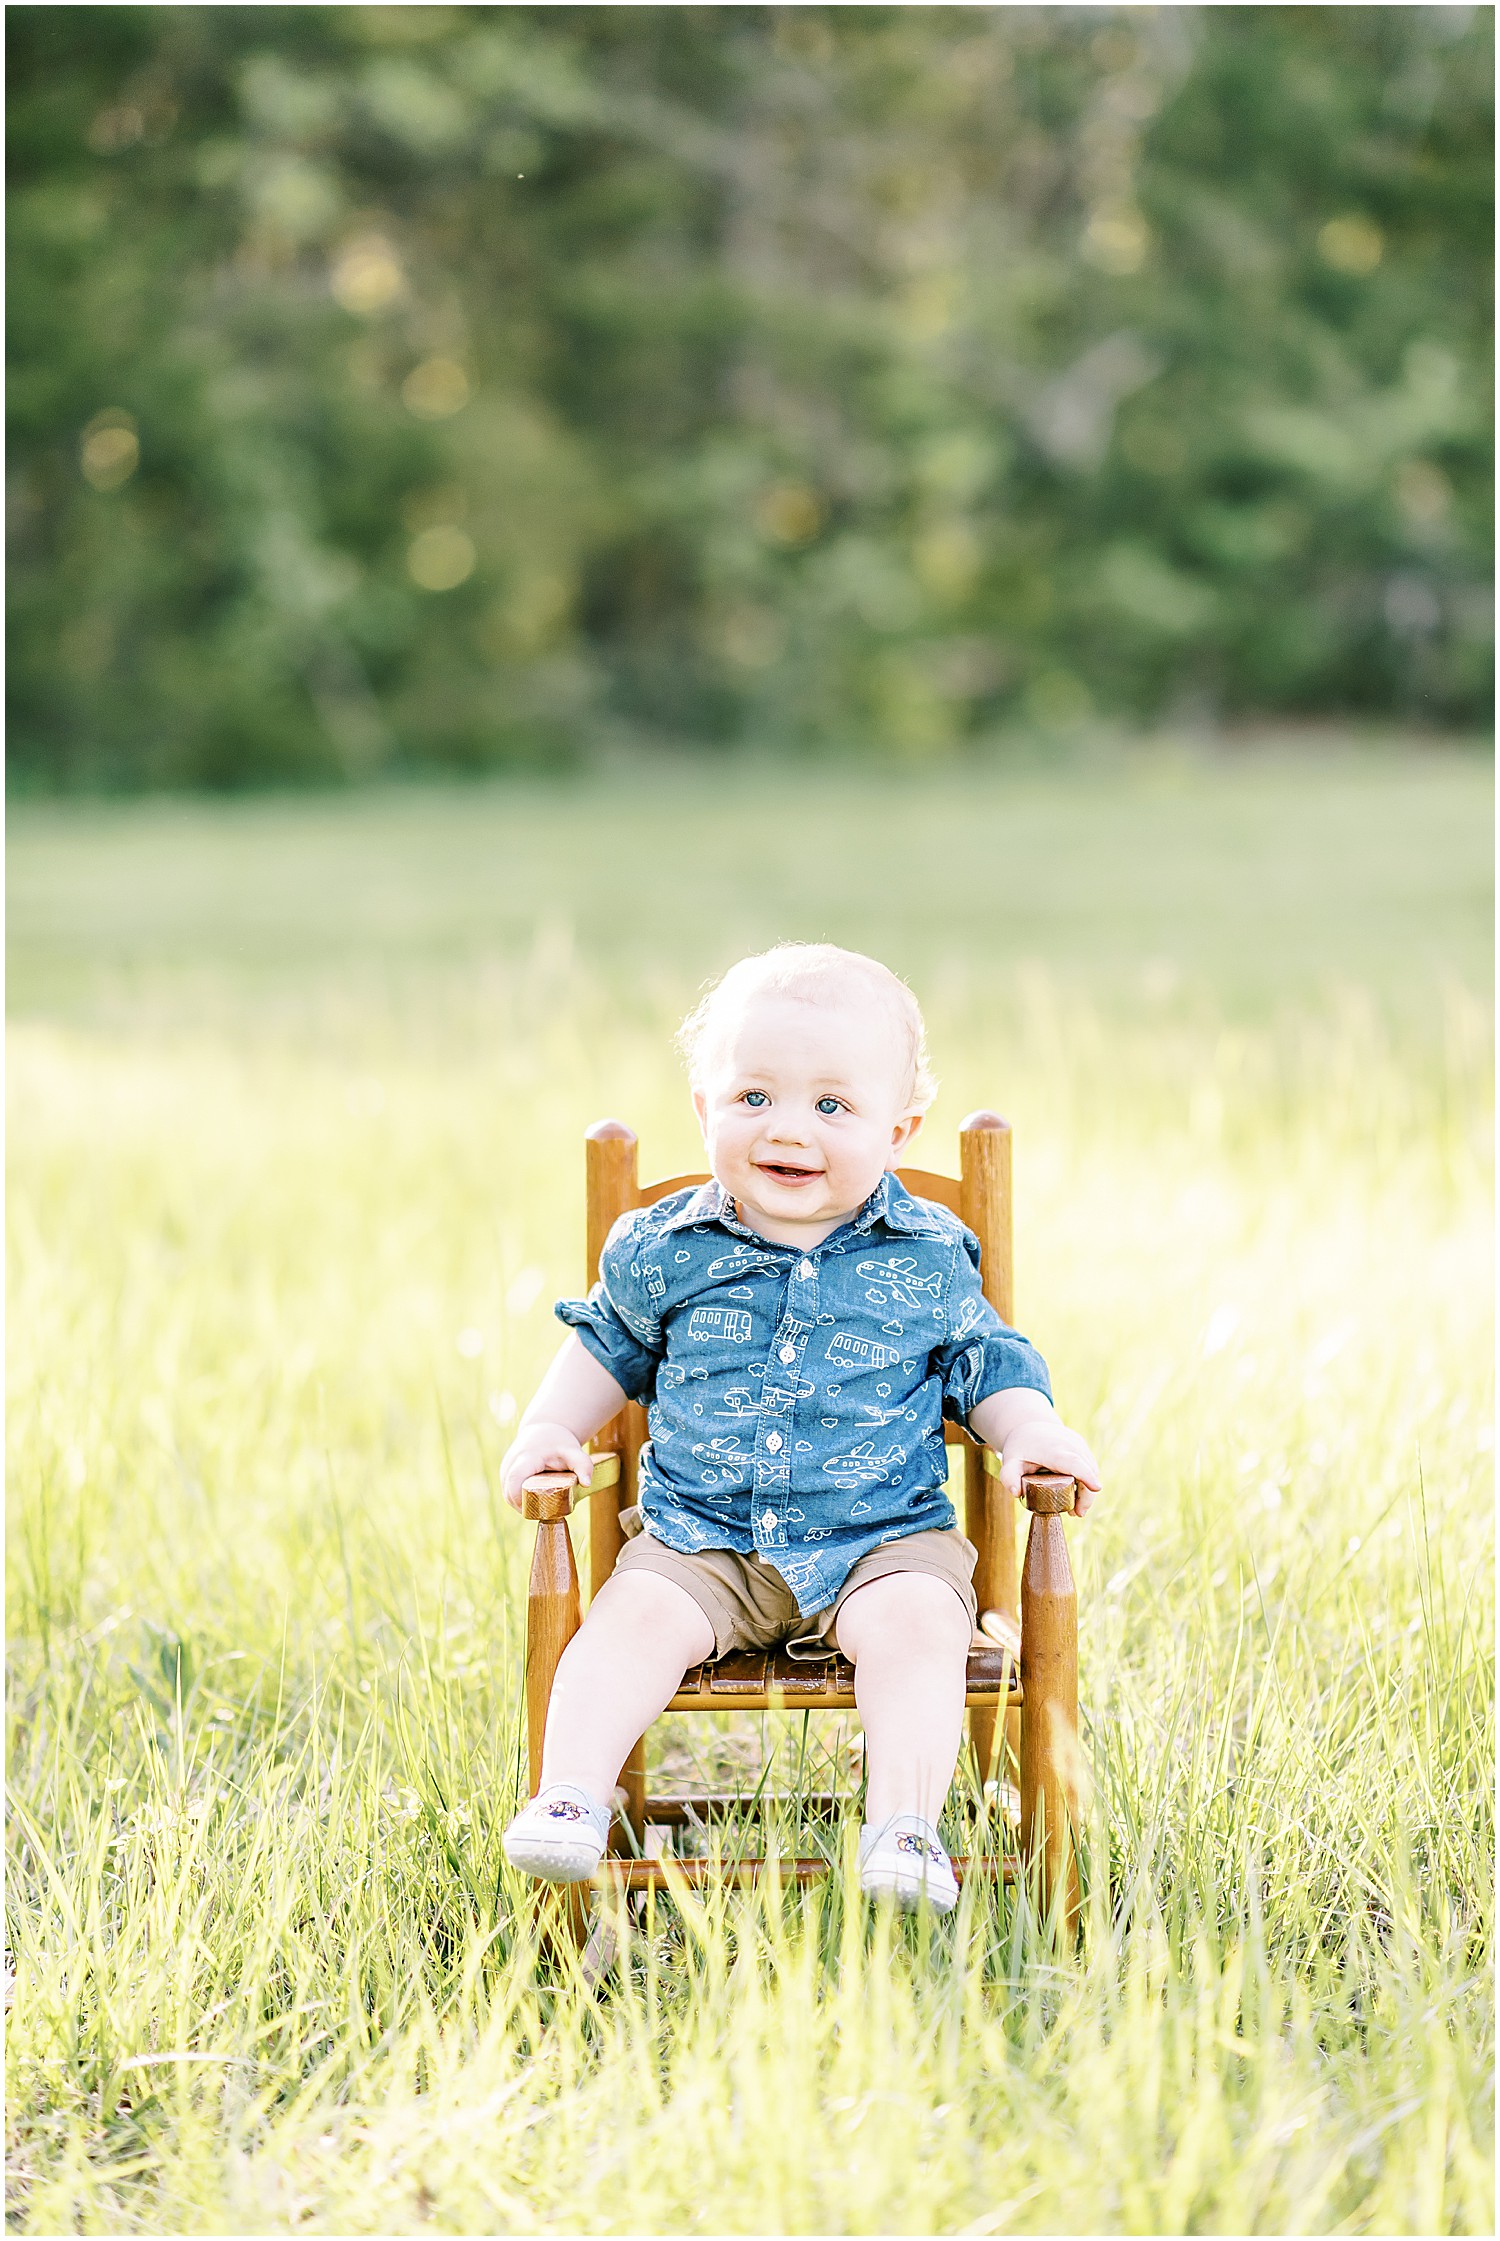 one year old boy in blue shirt sitting on wooden rocking chair in the grass